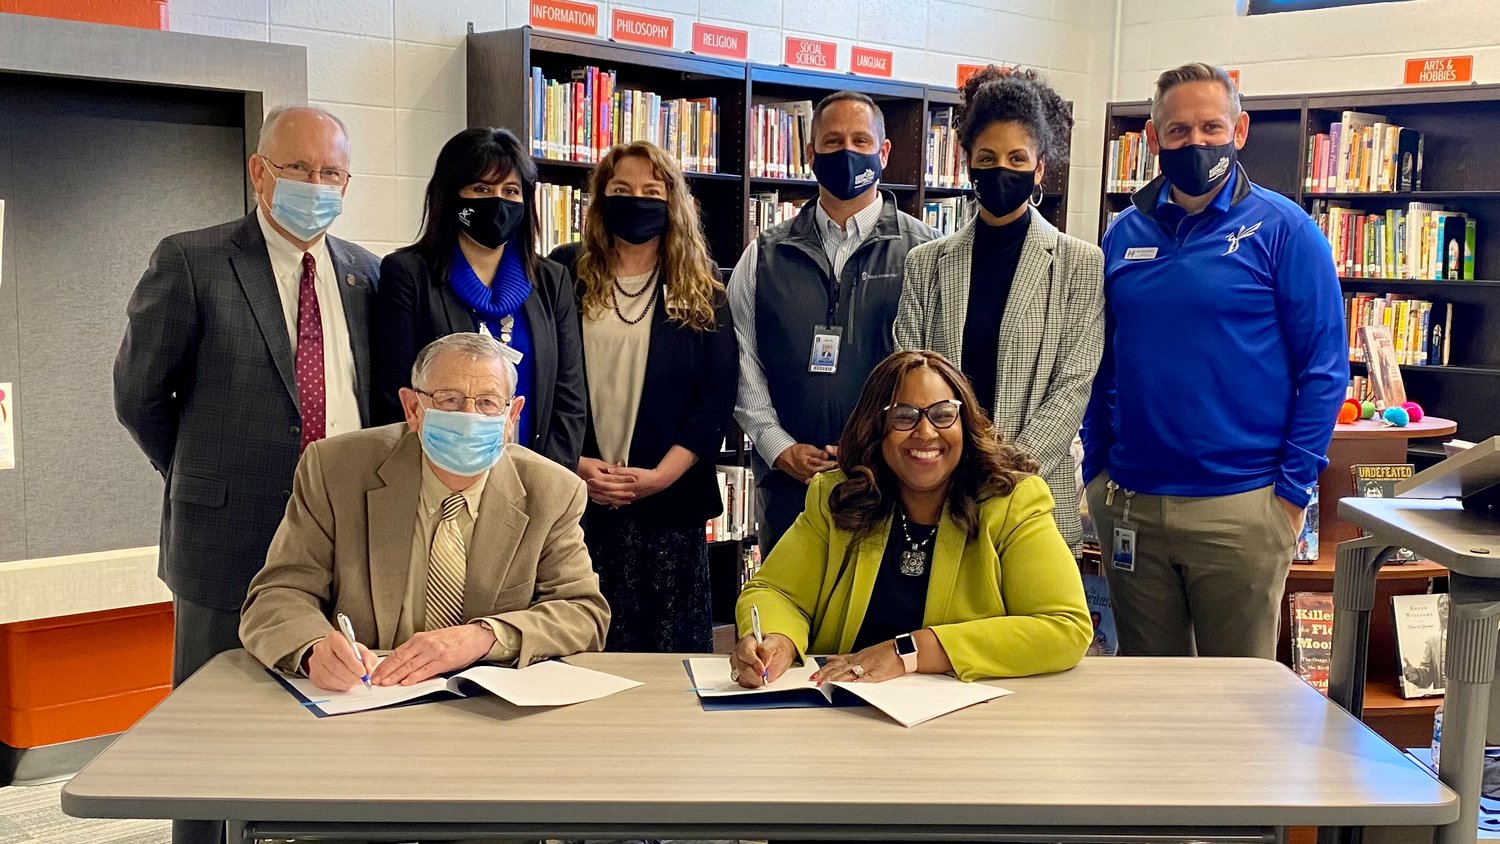 Seated, MSU Provost Frank Einhellig and SPS Superintendent Grenita Lathan sign a memorandum of understanding with other representatives of the organizations in attendance.